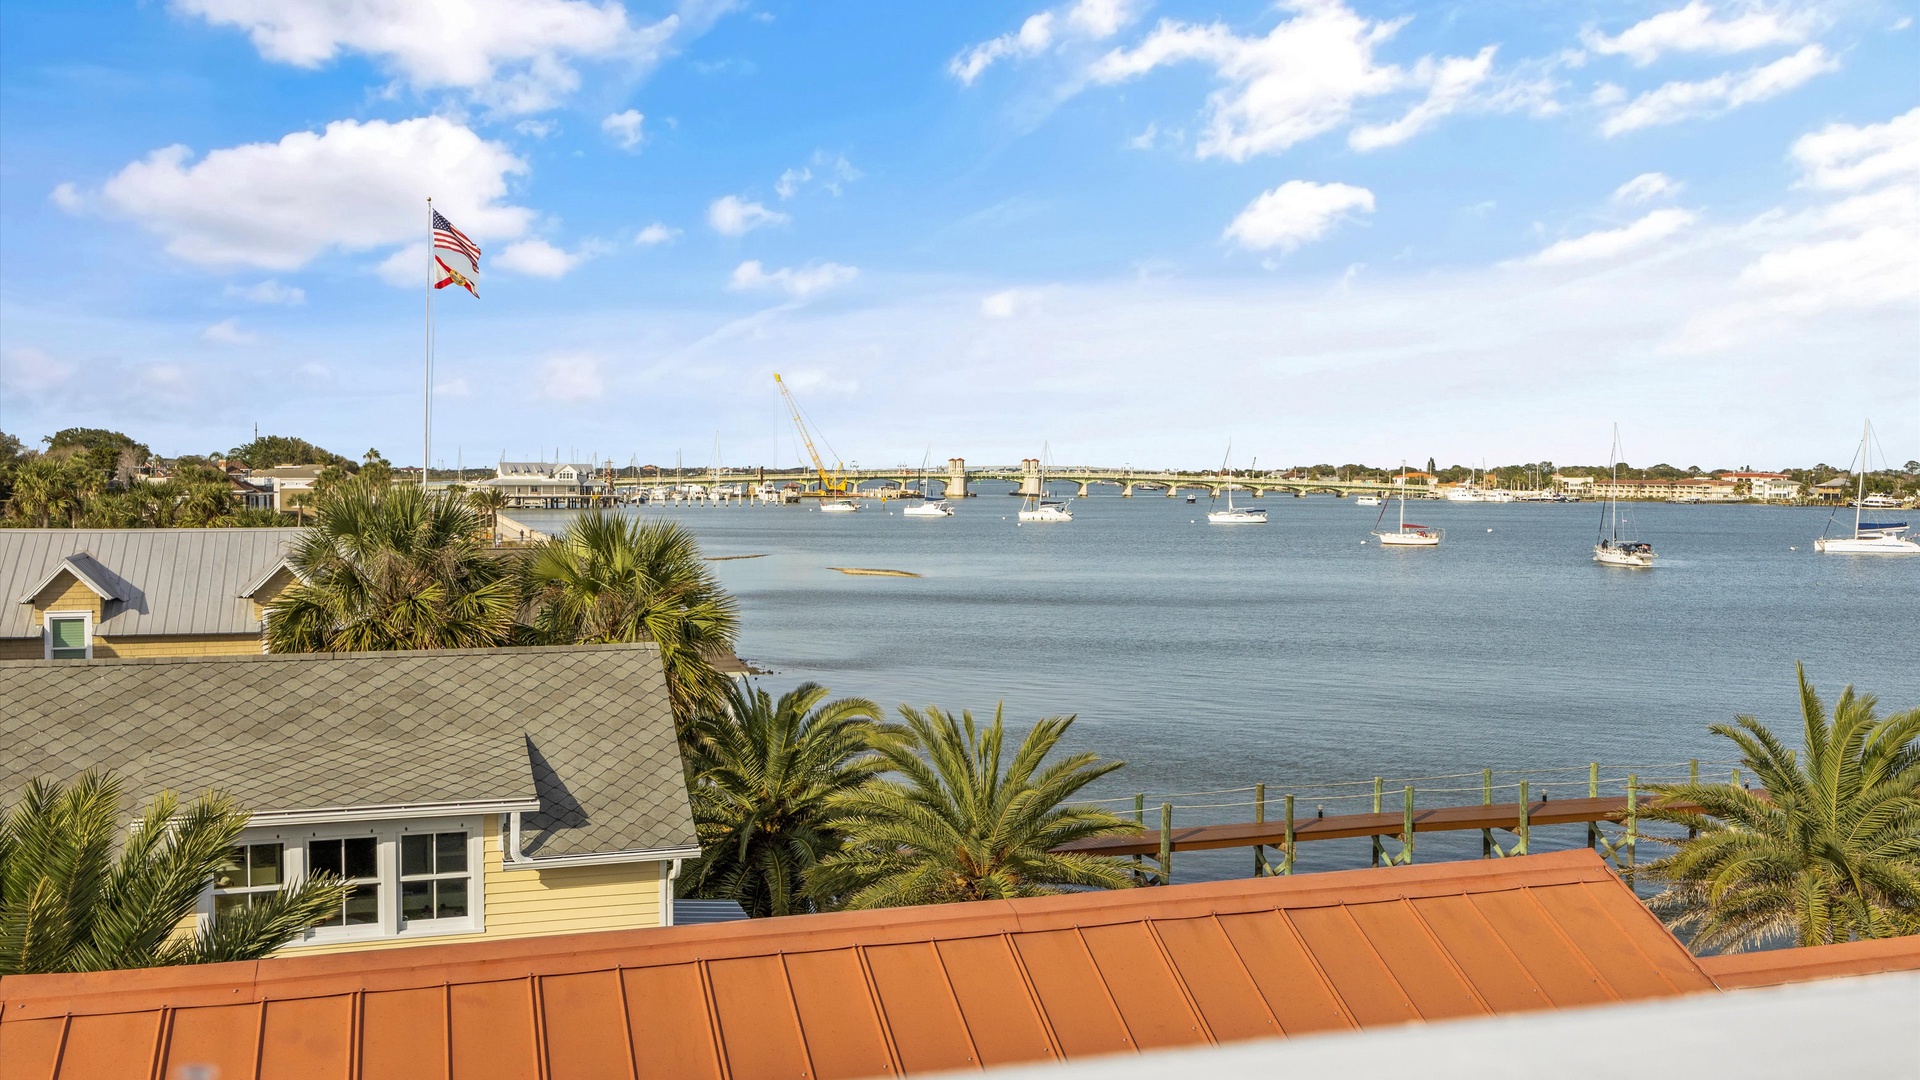 Enjoy meals alfresco or lounge with gorgeous water views on the deck